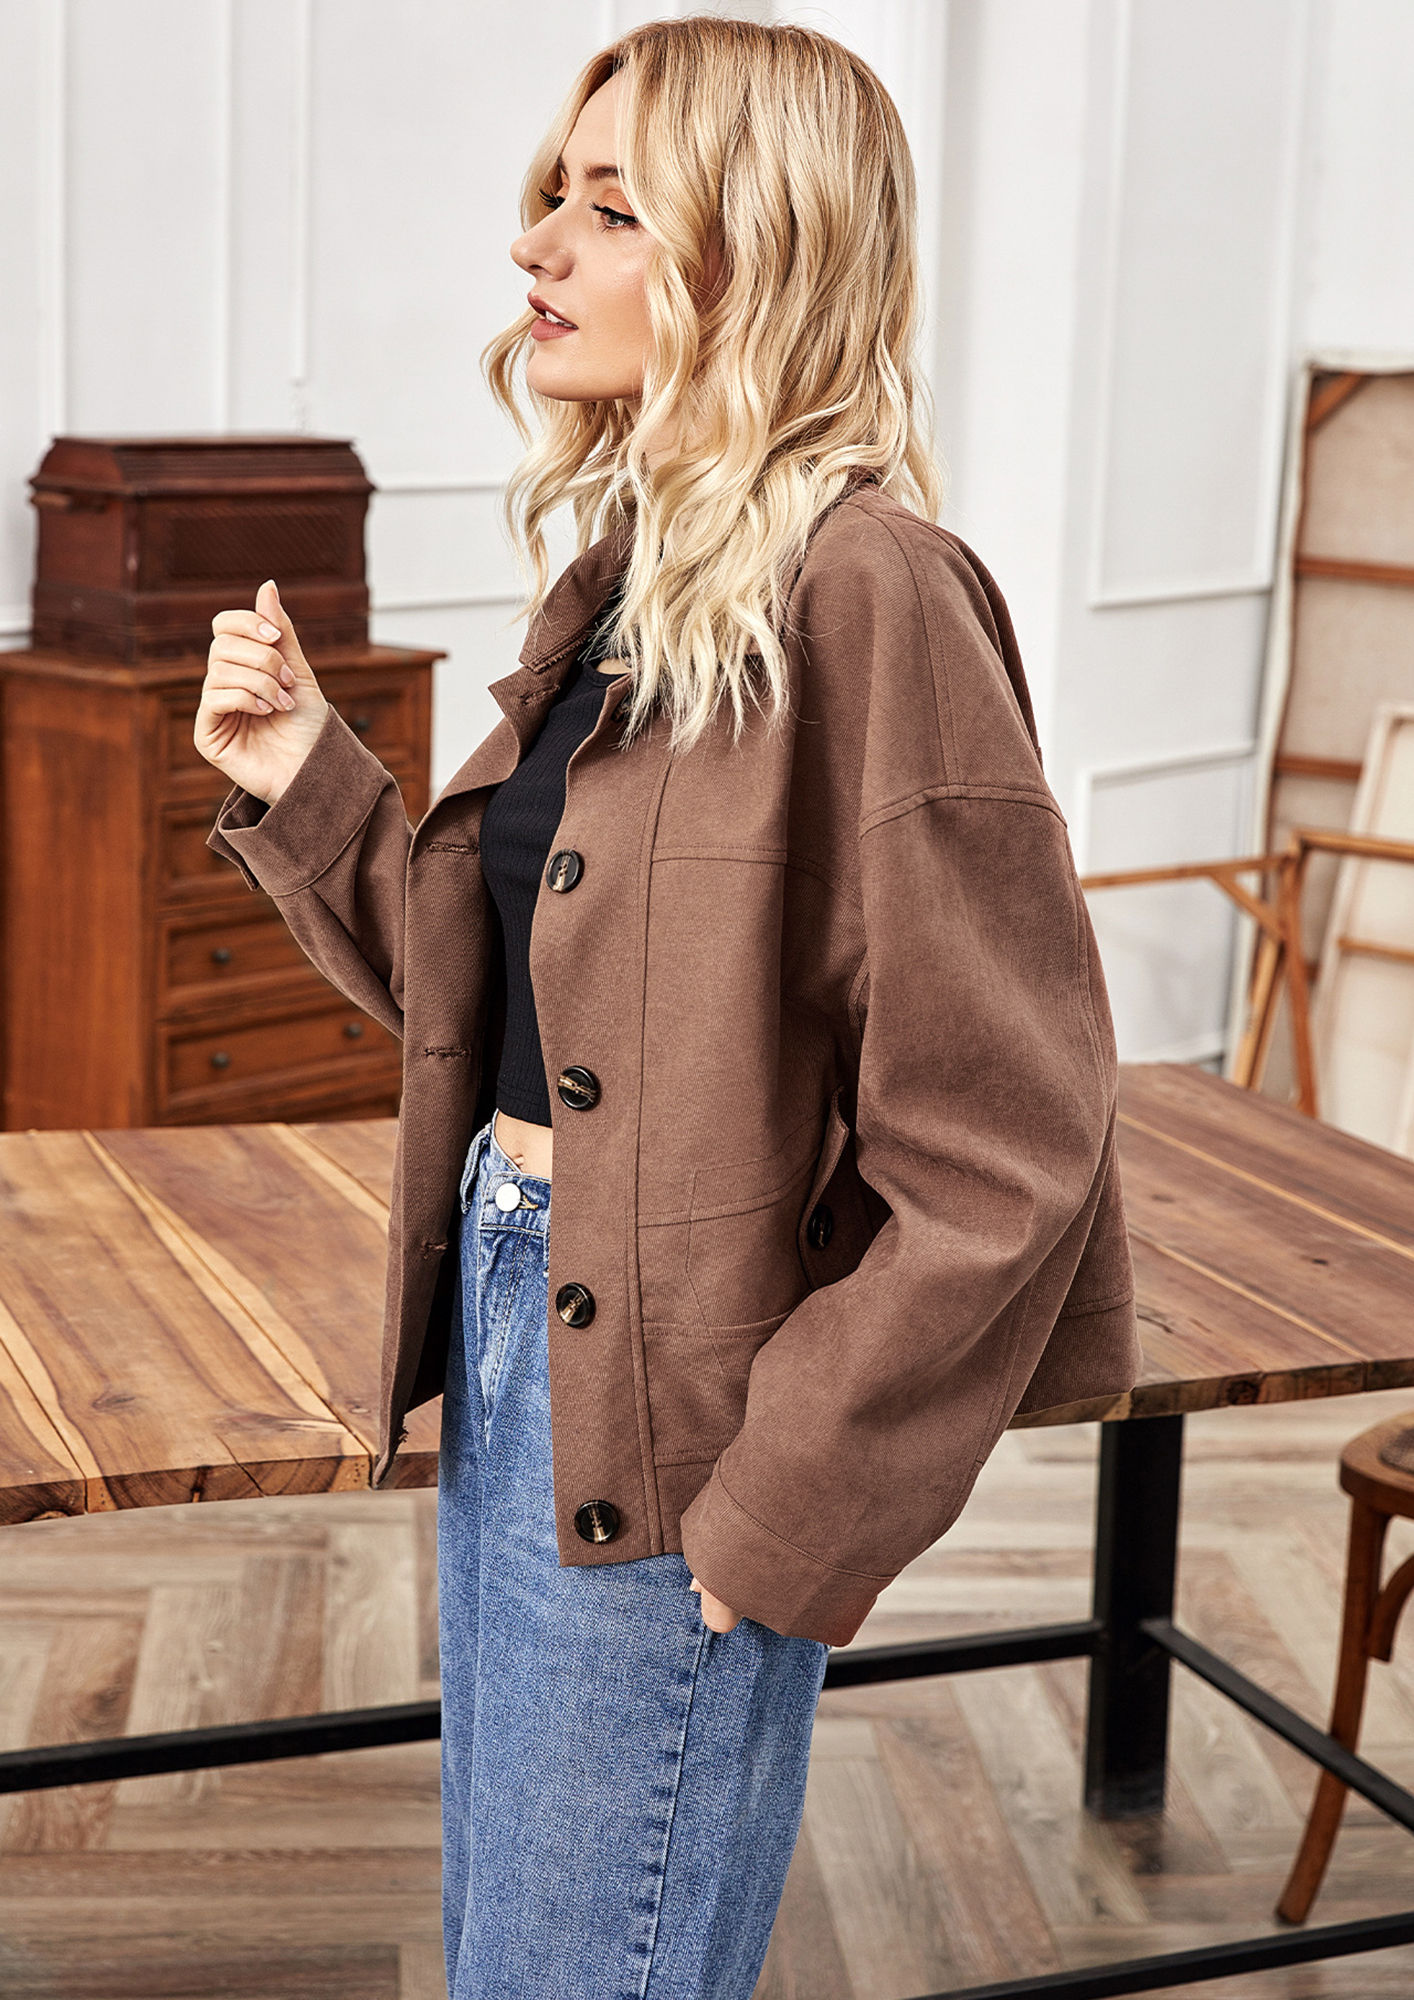 How to Wear a Utility or Khaki Jacket: 7 Cute Utility jacket Outfits -  Dreaming Loud